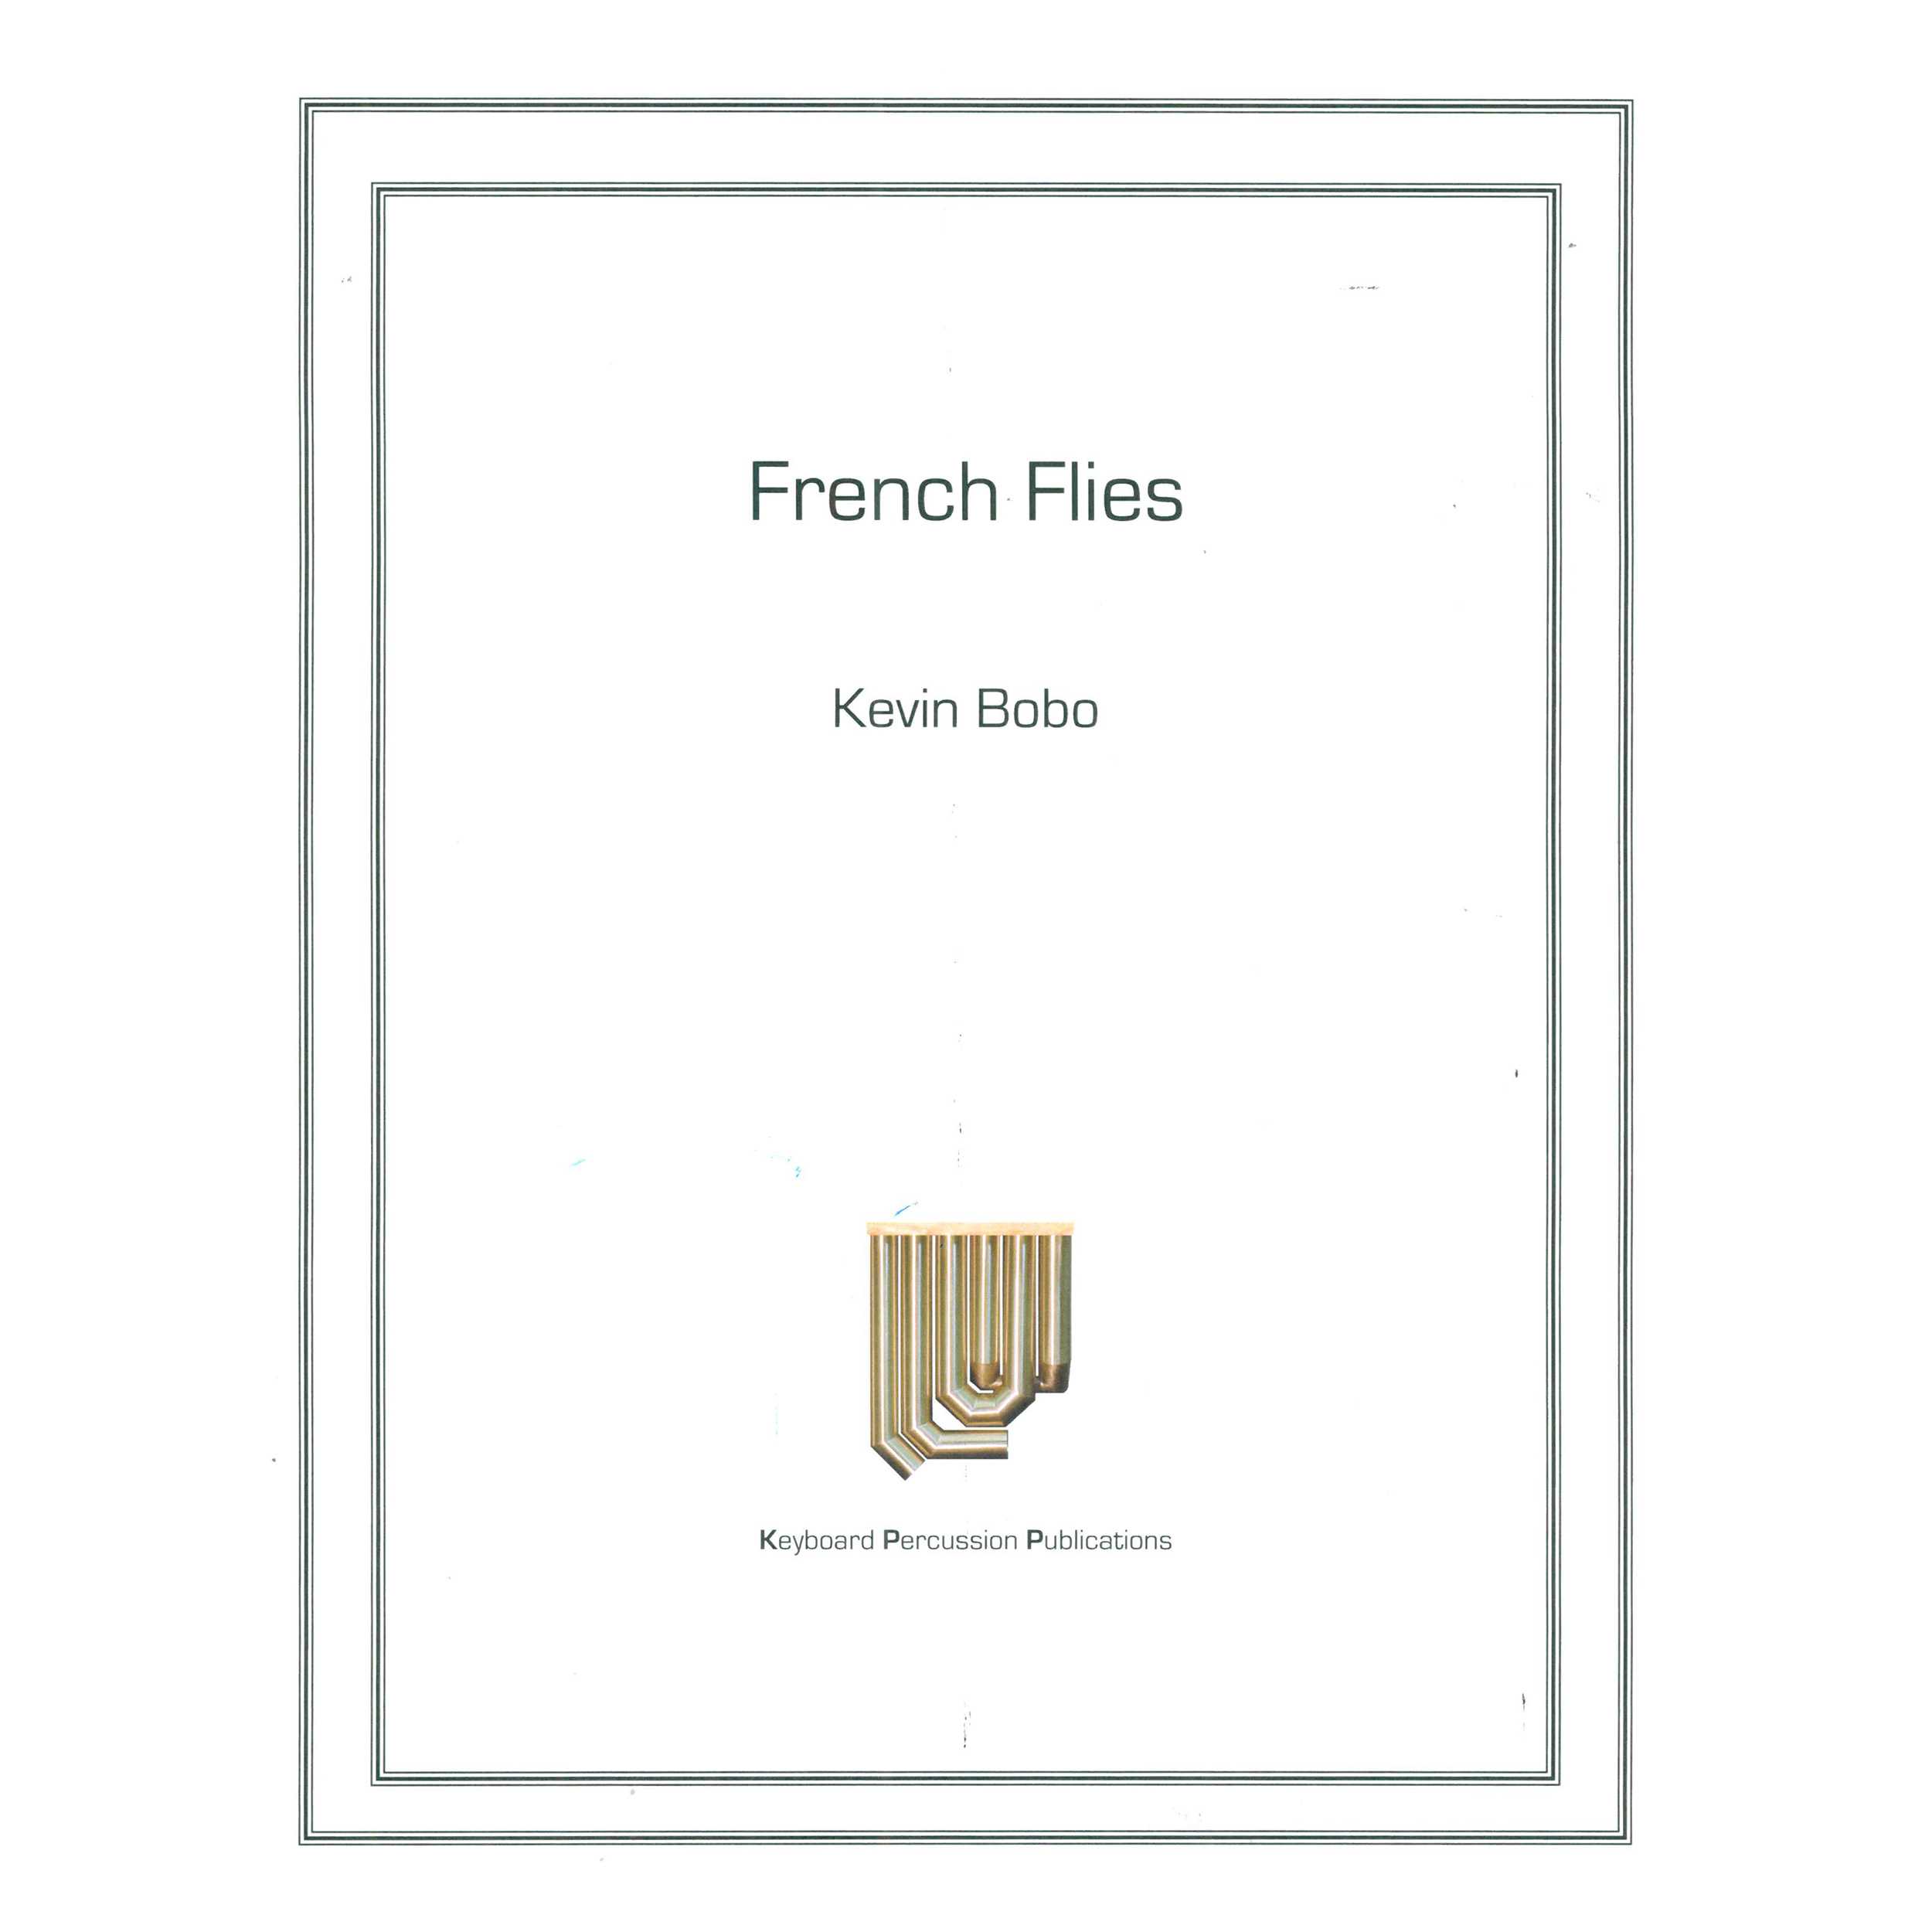 French Flies by Kevin Bobo